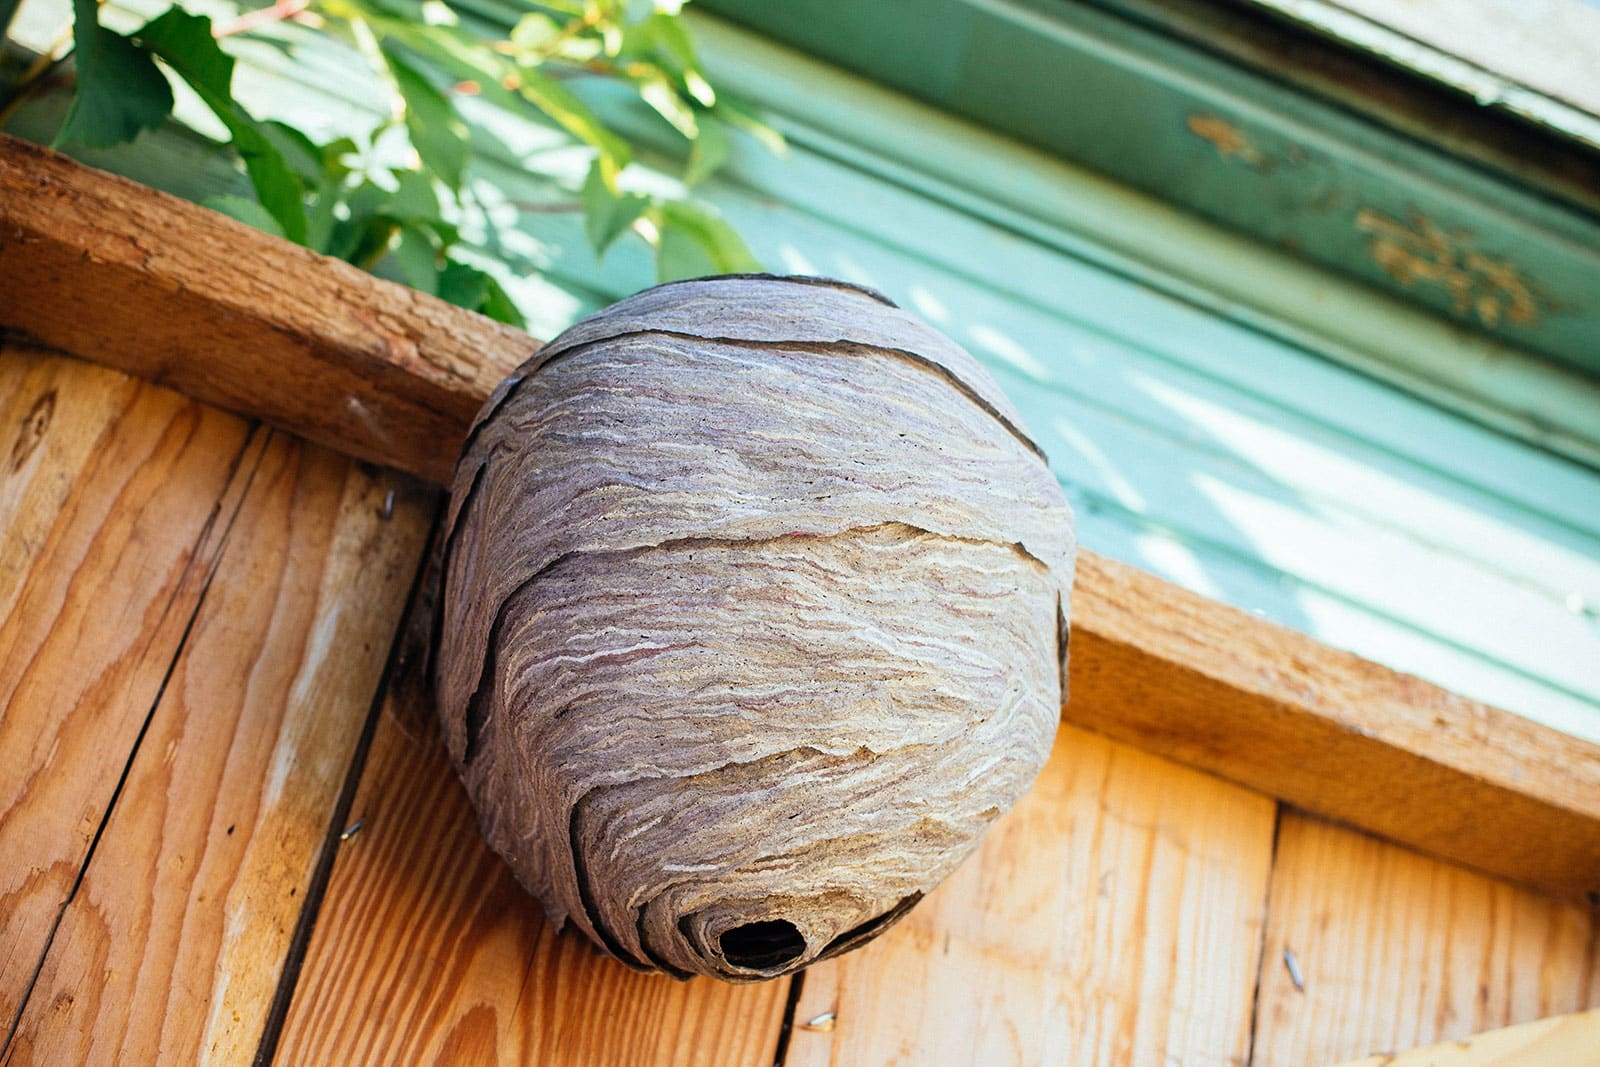 Empty wasp nest on the side of a shed